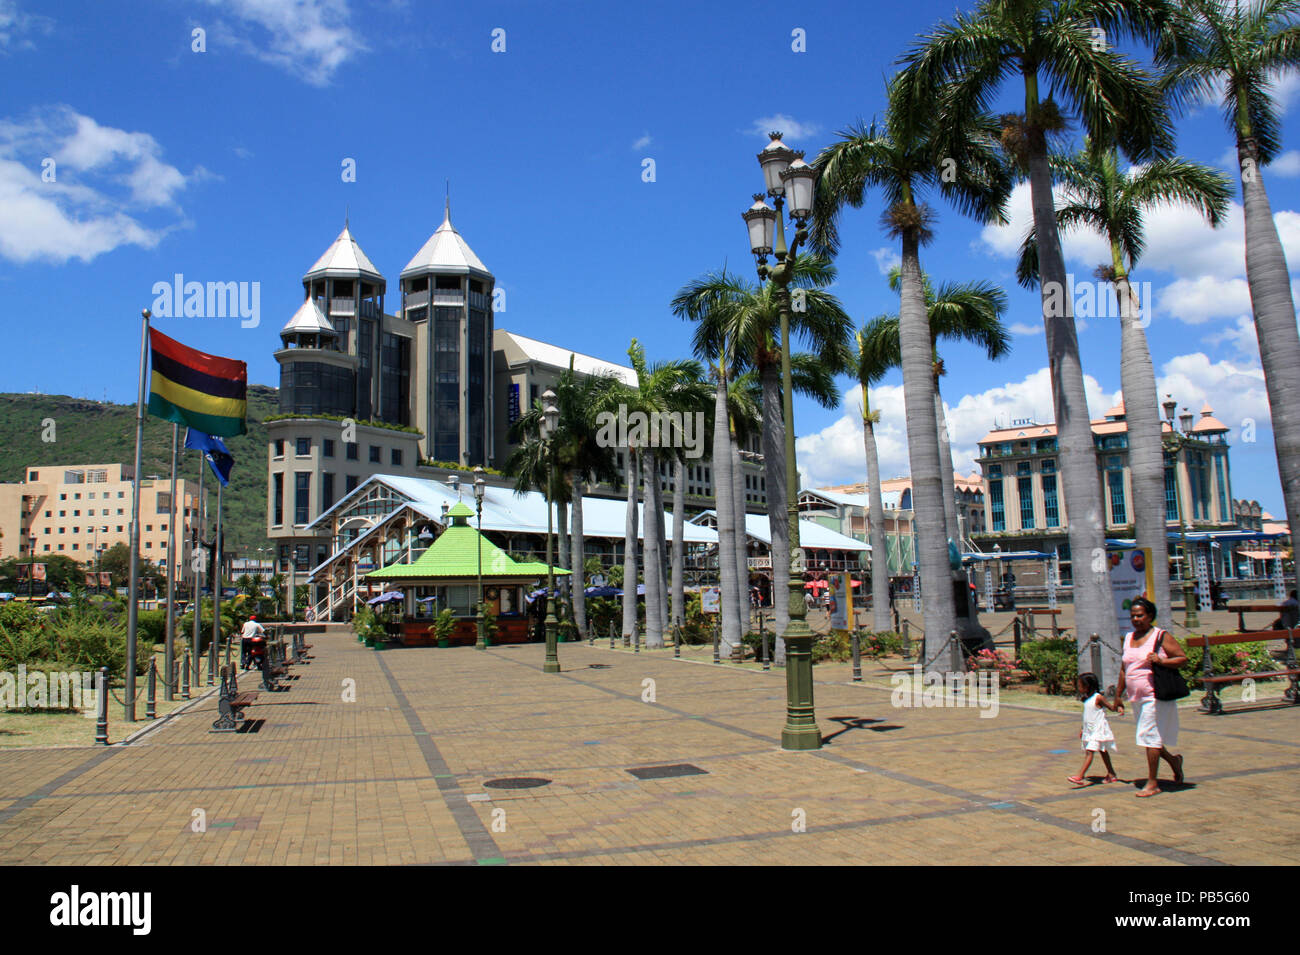 Flag of Mauritius flying in the wind at the palm tree lined main square in front of the Caudan Waterfront in Port Louis, Mauritius Stock Photo